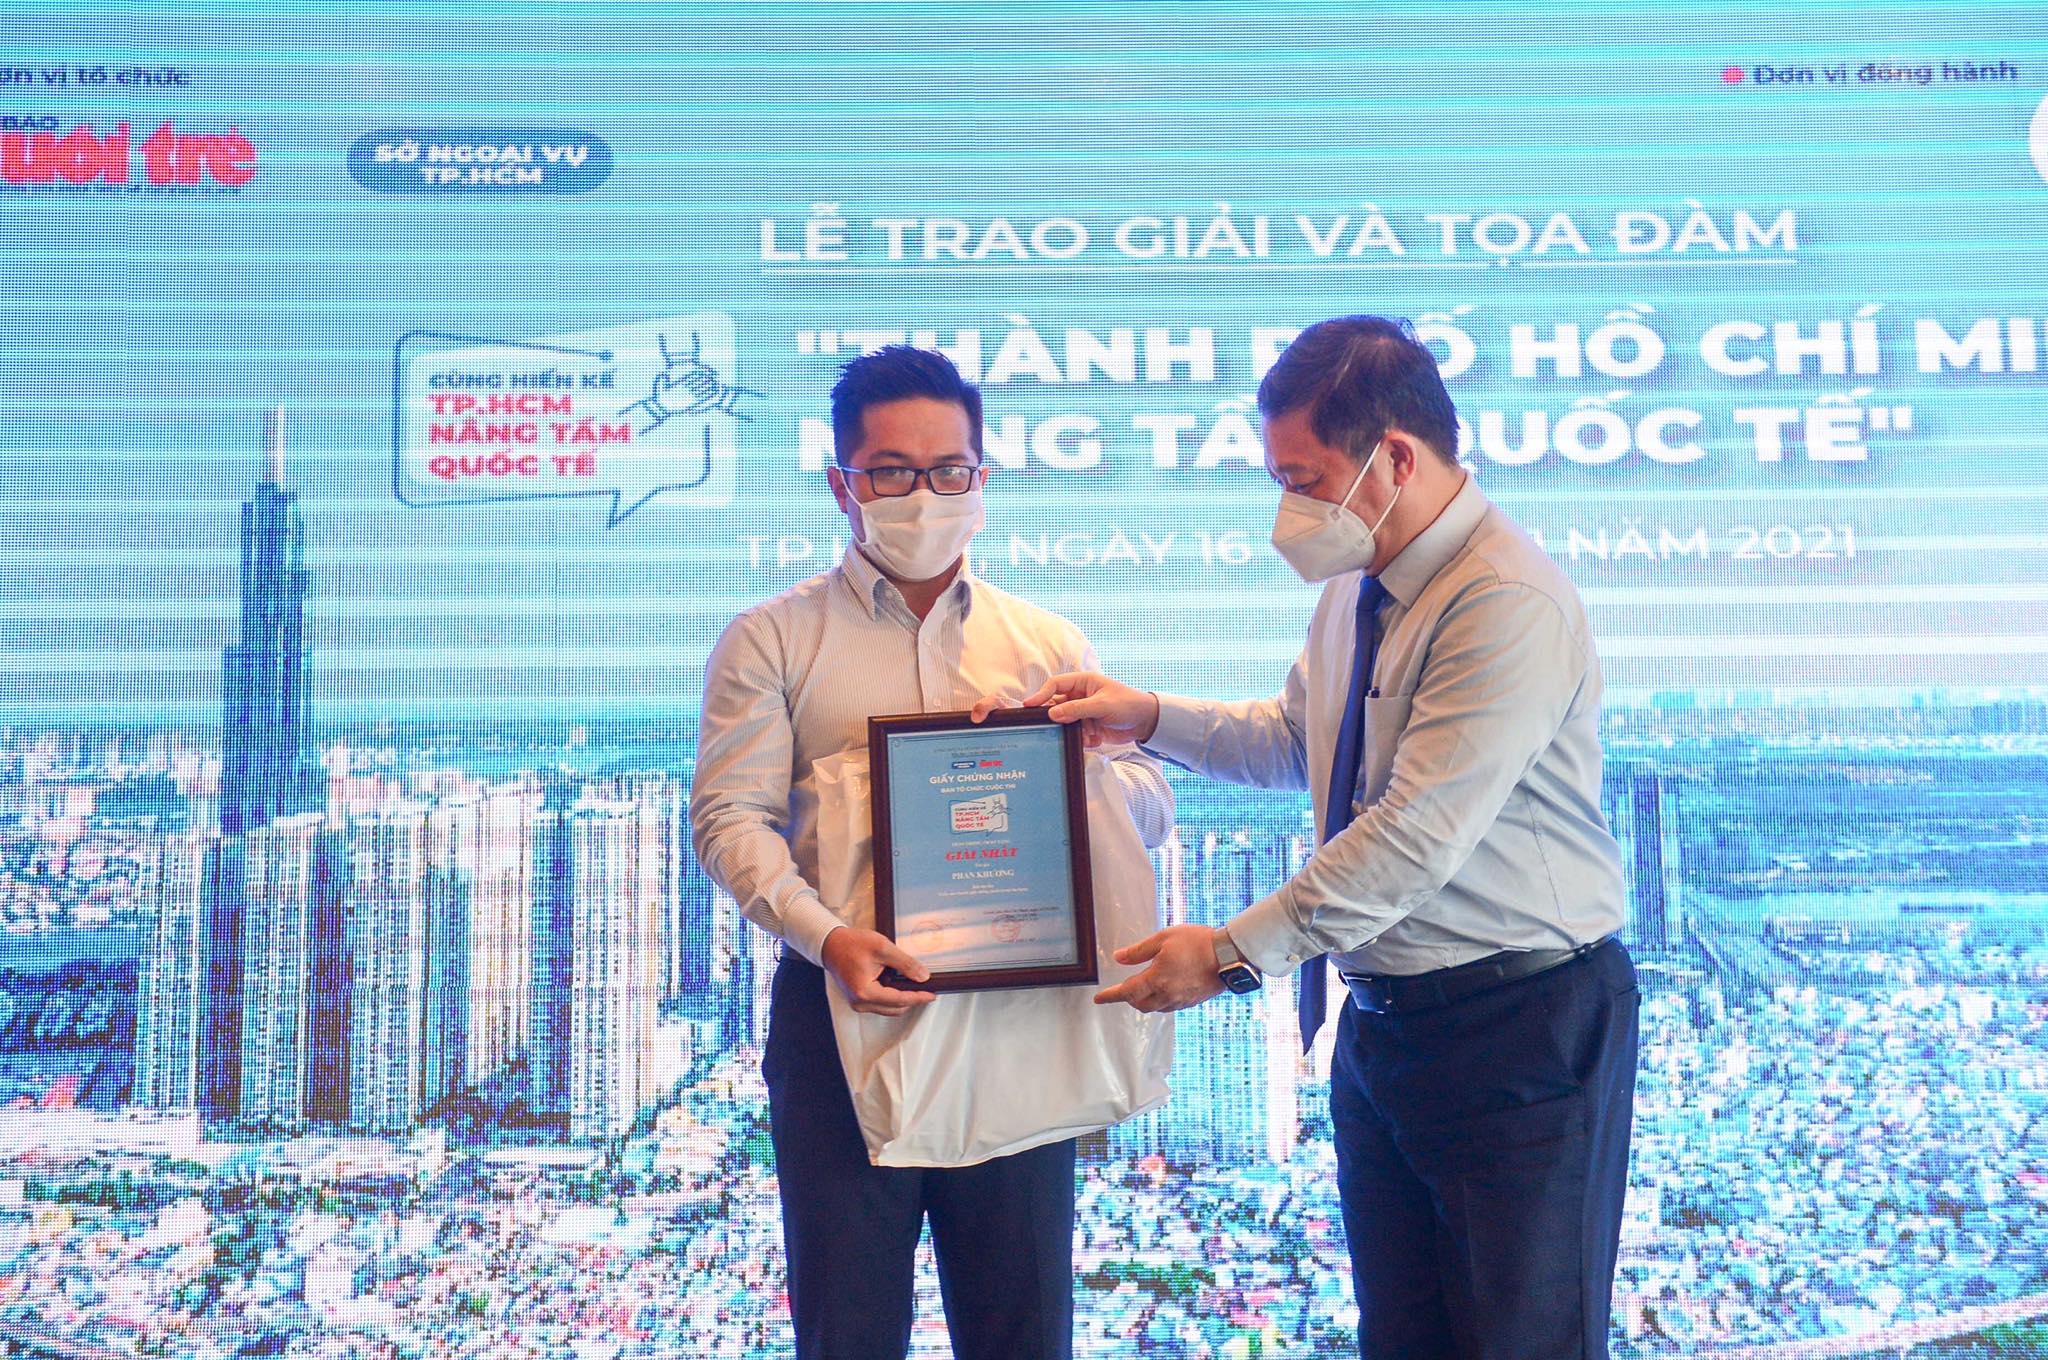 Prize winners present ideas at awards ceremony of ‘Ho Chi Minh City Goes Global’ contest